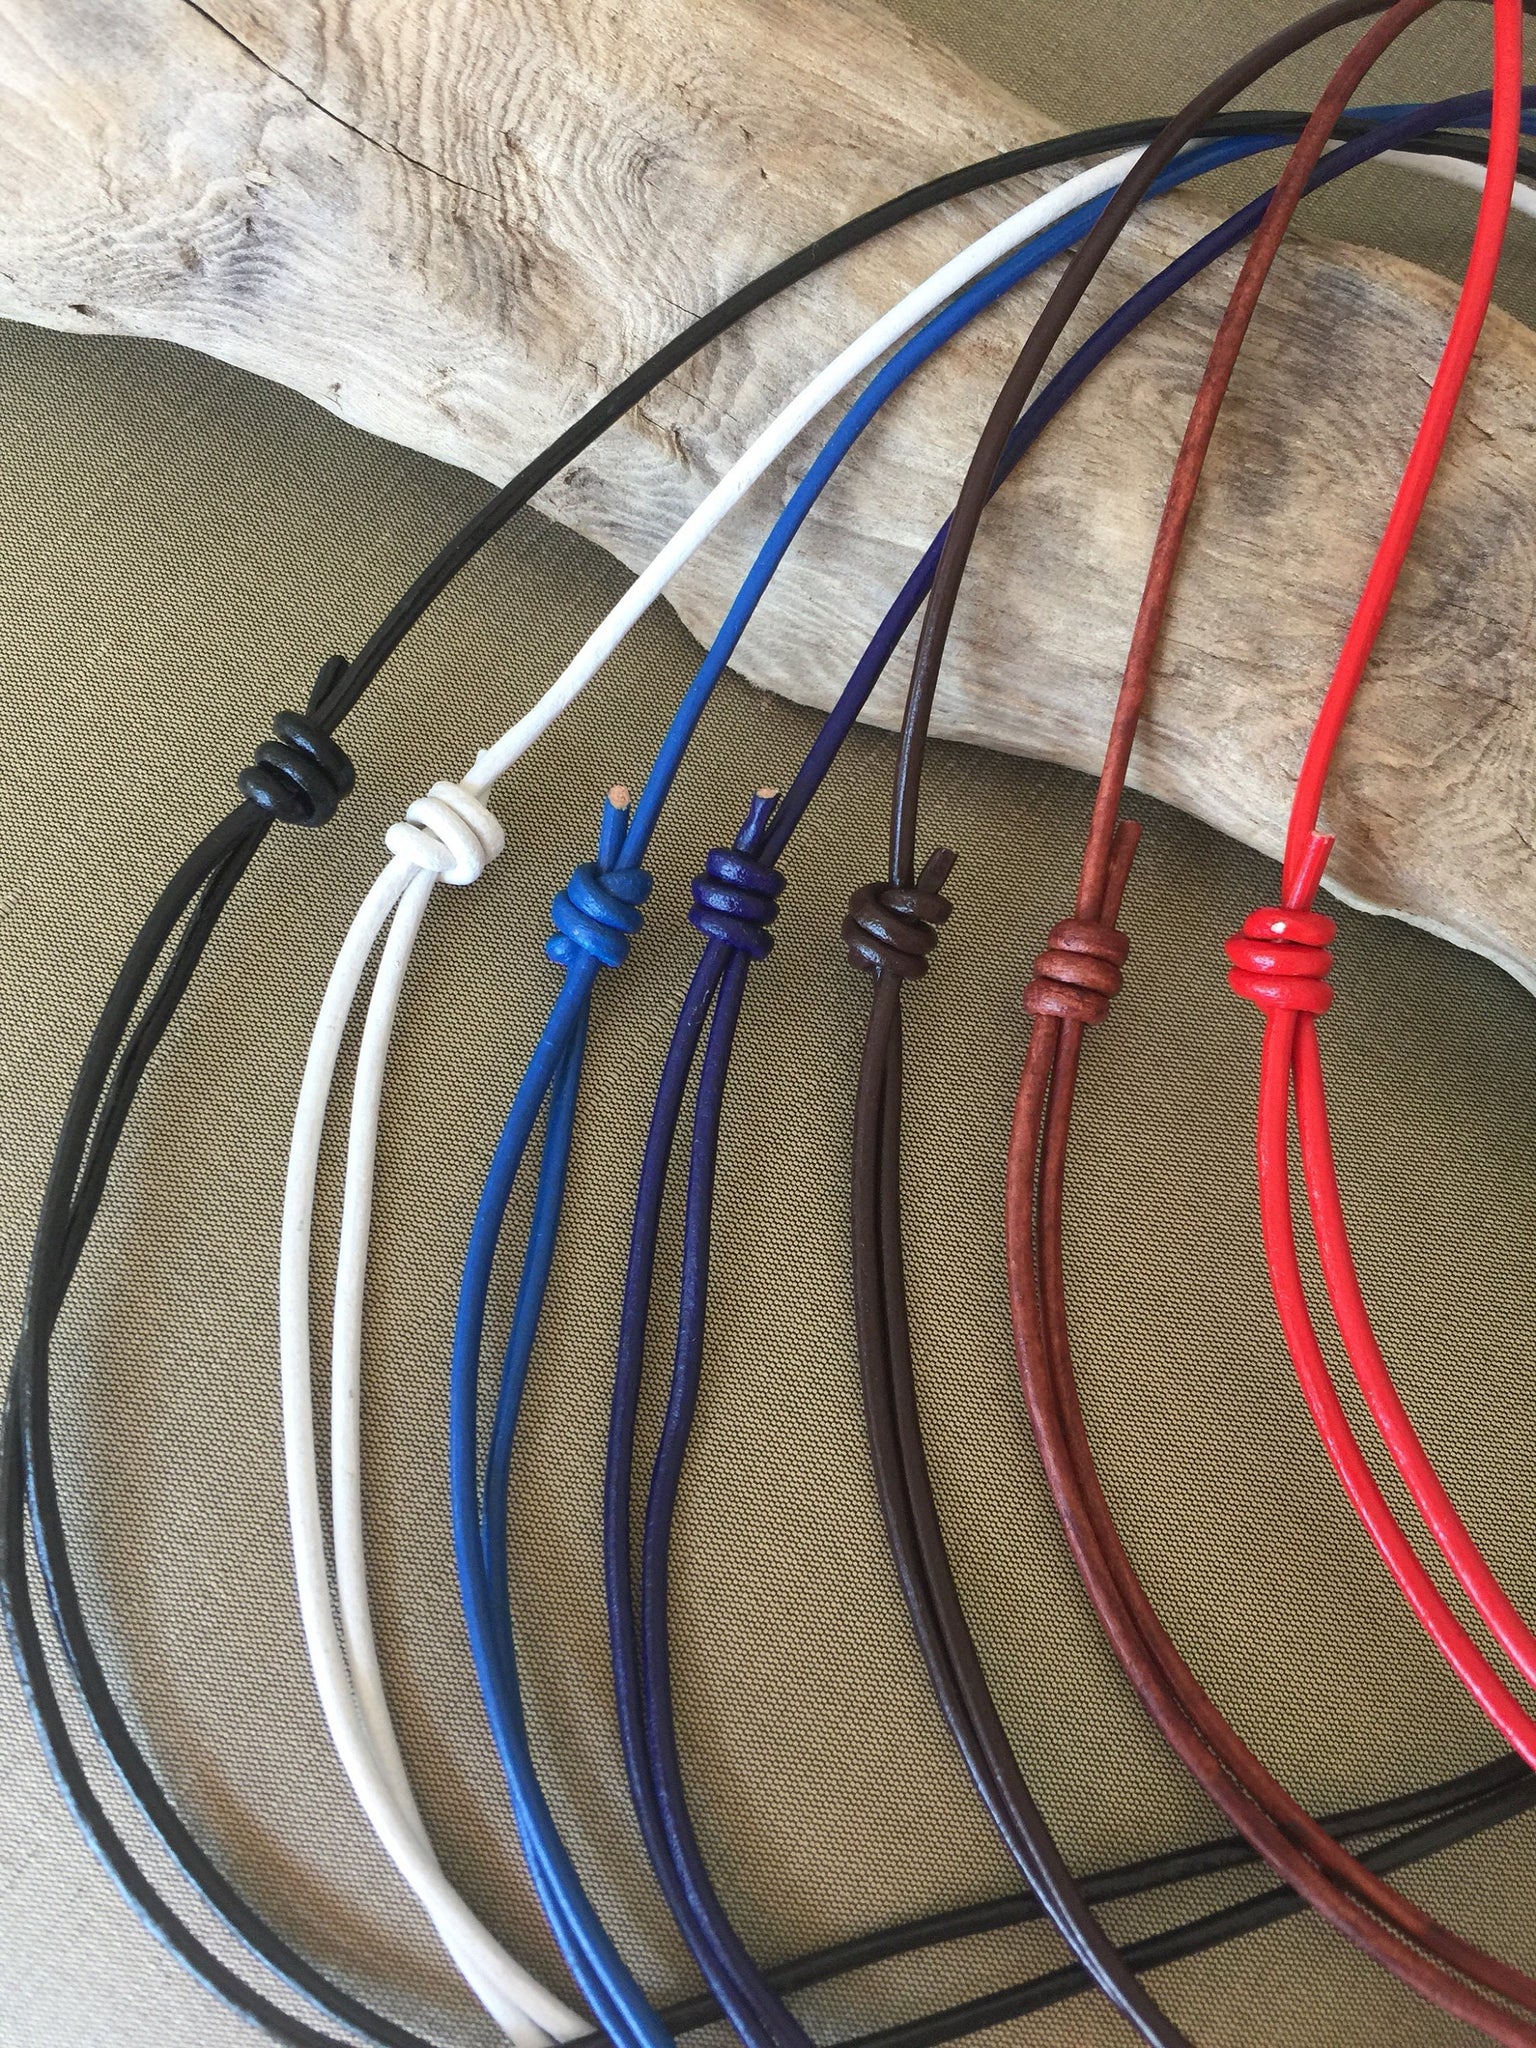 Leather Cord Necklace 2 Mm 2.5 Mm 3 Mm Sliding Knots Adjustable Genuin  Natural Dye Jewelry Cord Choker for Pendant Leather String 